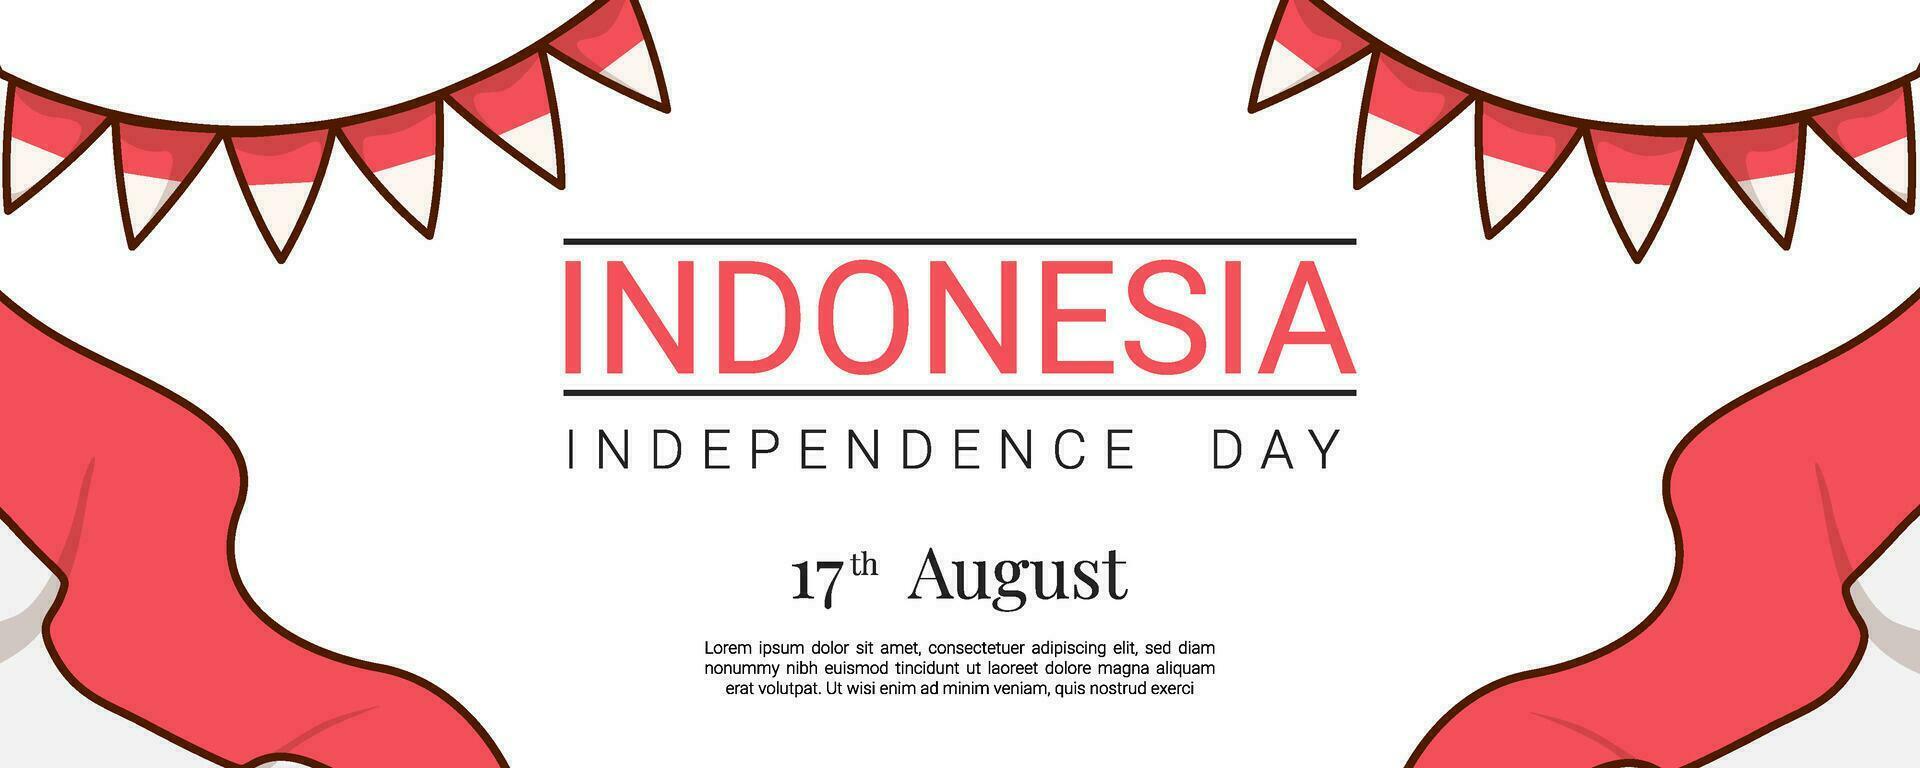 Indonesian independence day themed banner template design vector